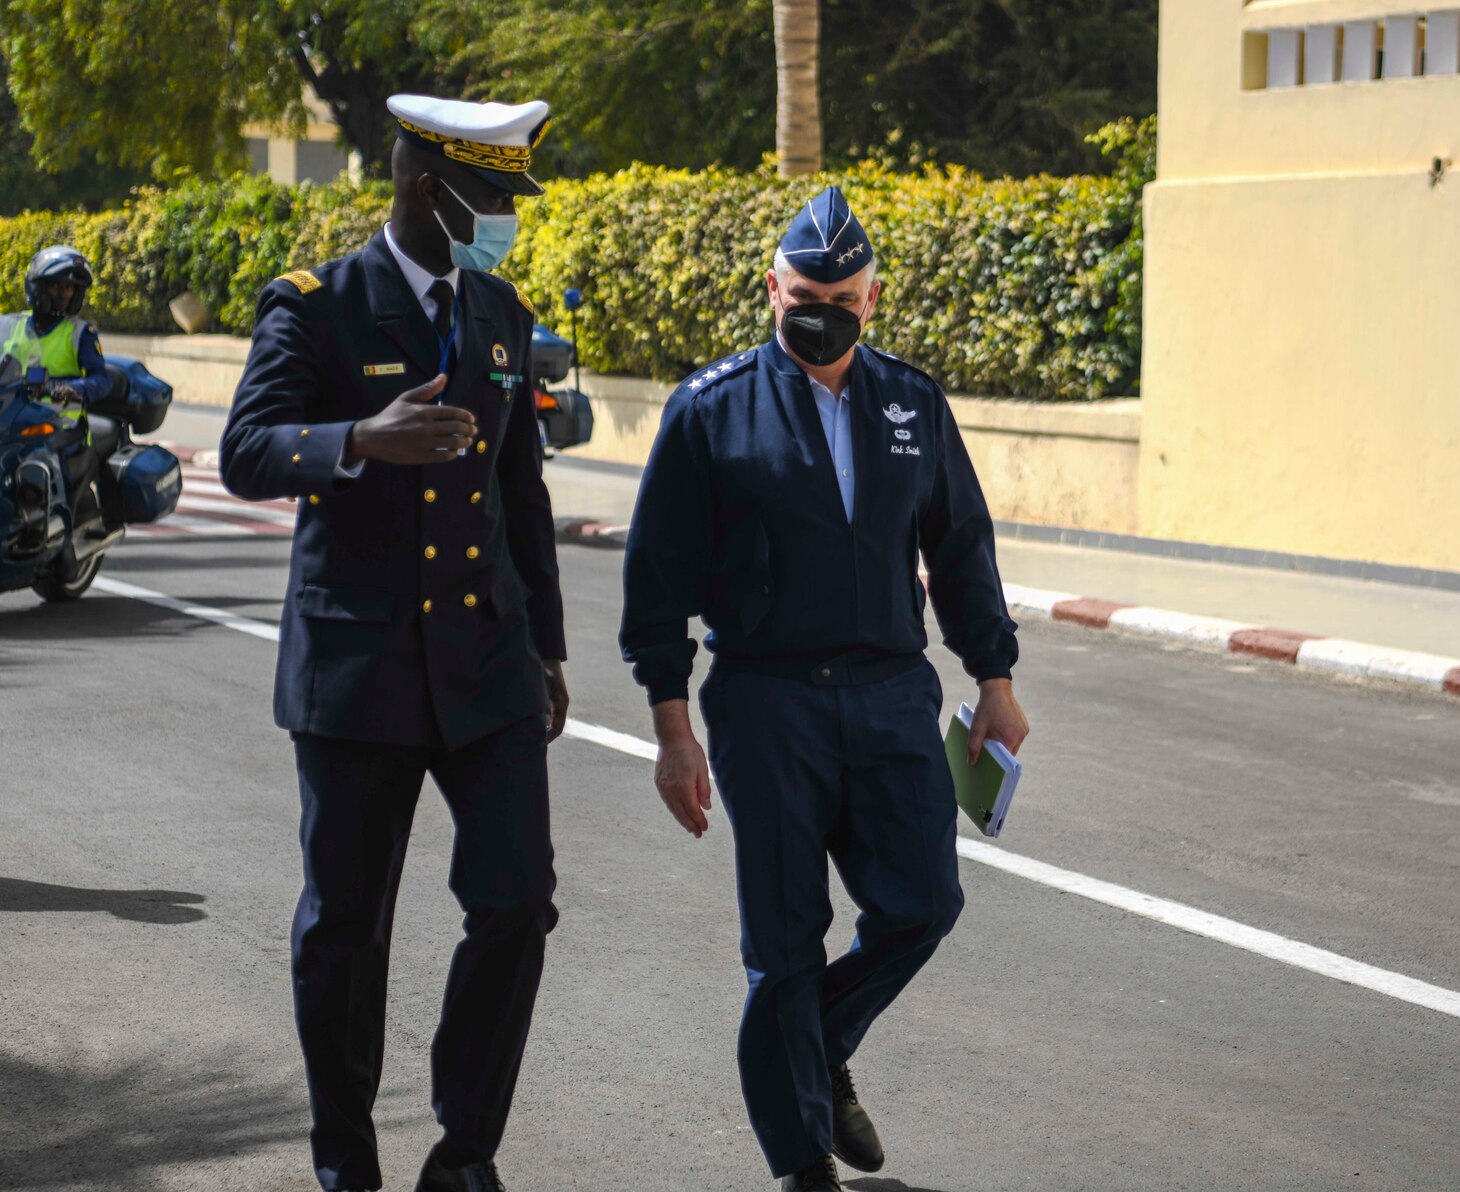 U.S. Air Force Lt. Gen. Kirk Smith, deputy commander, U.S. Africa Command, right, walks with Rear Adm. Oumar Wade, Senegalese Chief of Navy, at the Senegalese Naval Headquarters, in Dakar, Senegal, during the closing ceremony of Exercise Obangame Express 2022, Mar. 18, 2022.